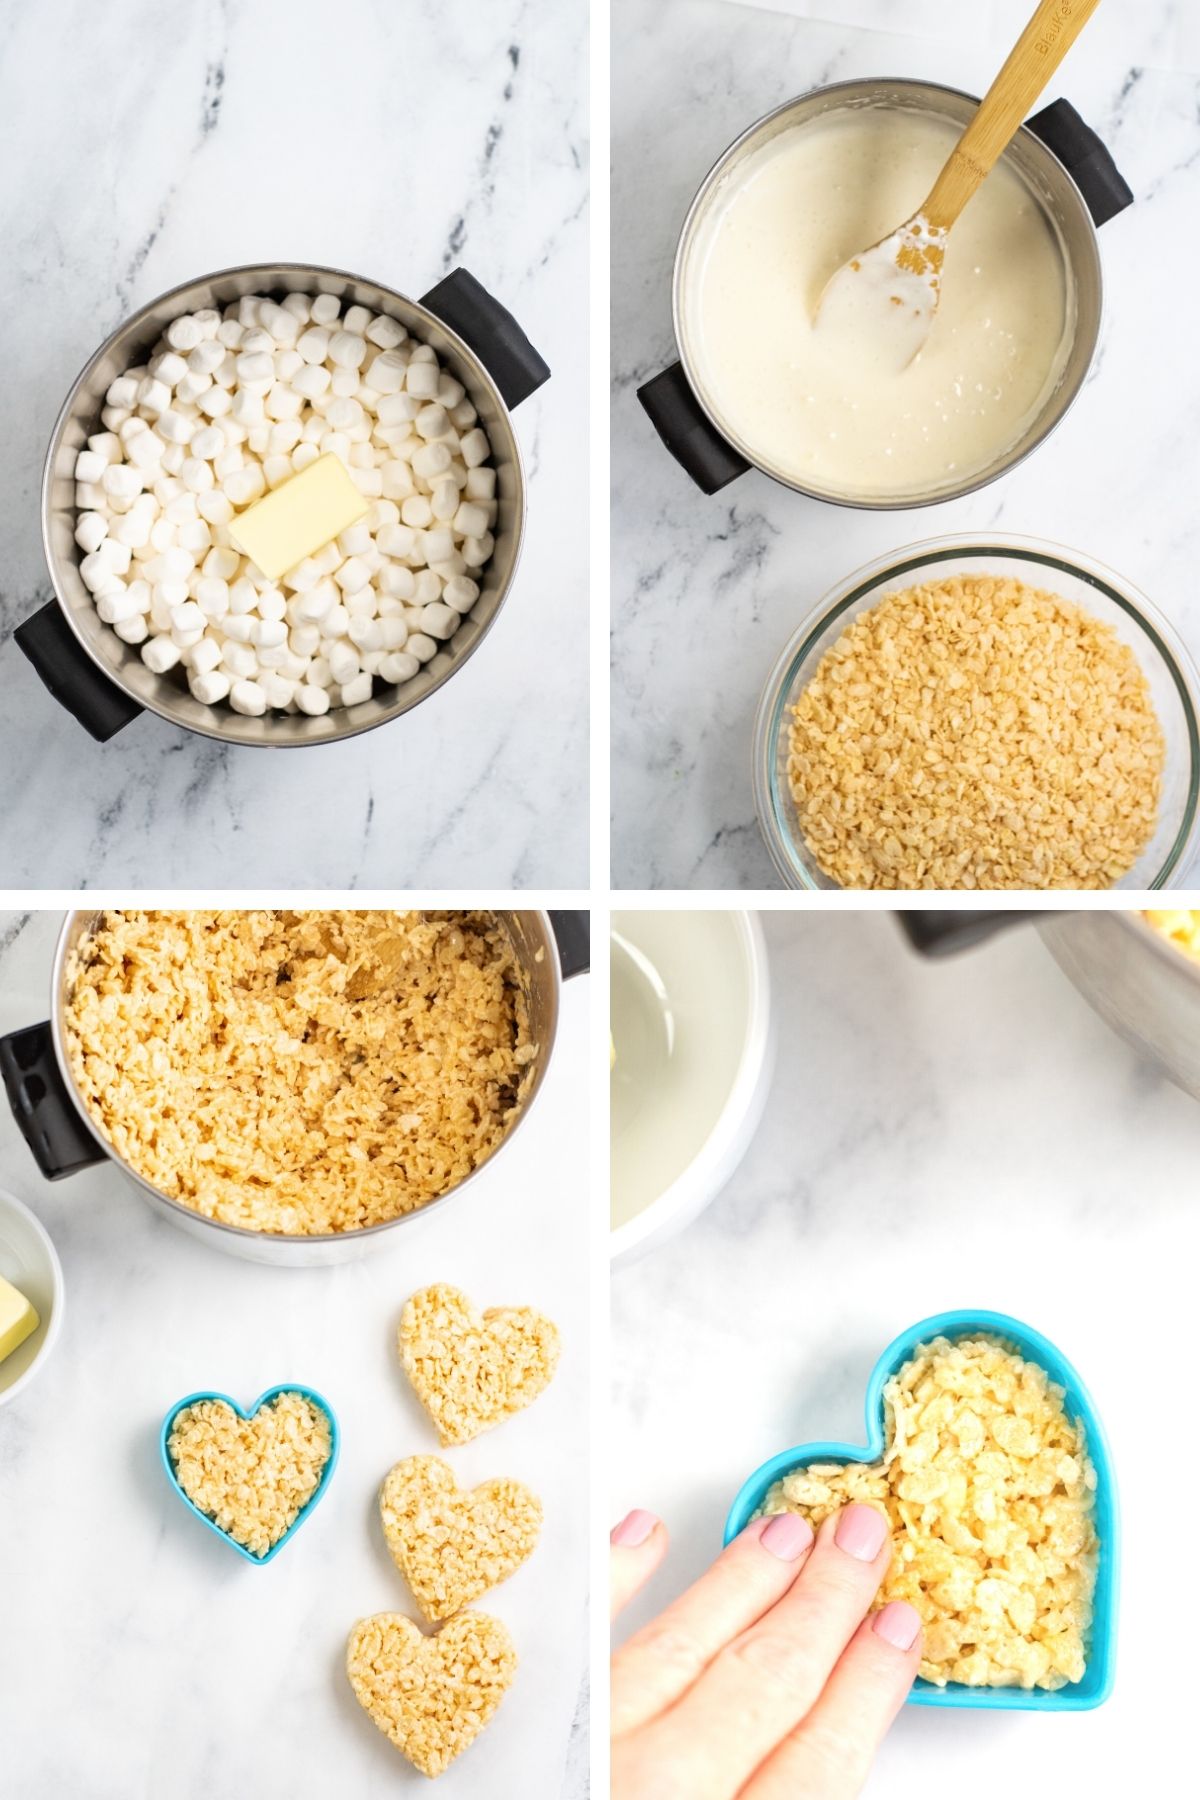 four photos:  mini marshmallows and a stick of butter in pot: melted marshmallows with a side of rice krispies cereal; cereal mixed in with marshmallows and a heart shaped cookie cutter; hand pressing krispy treats into blue heart shaped cookie cutter